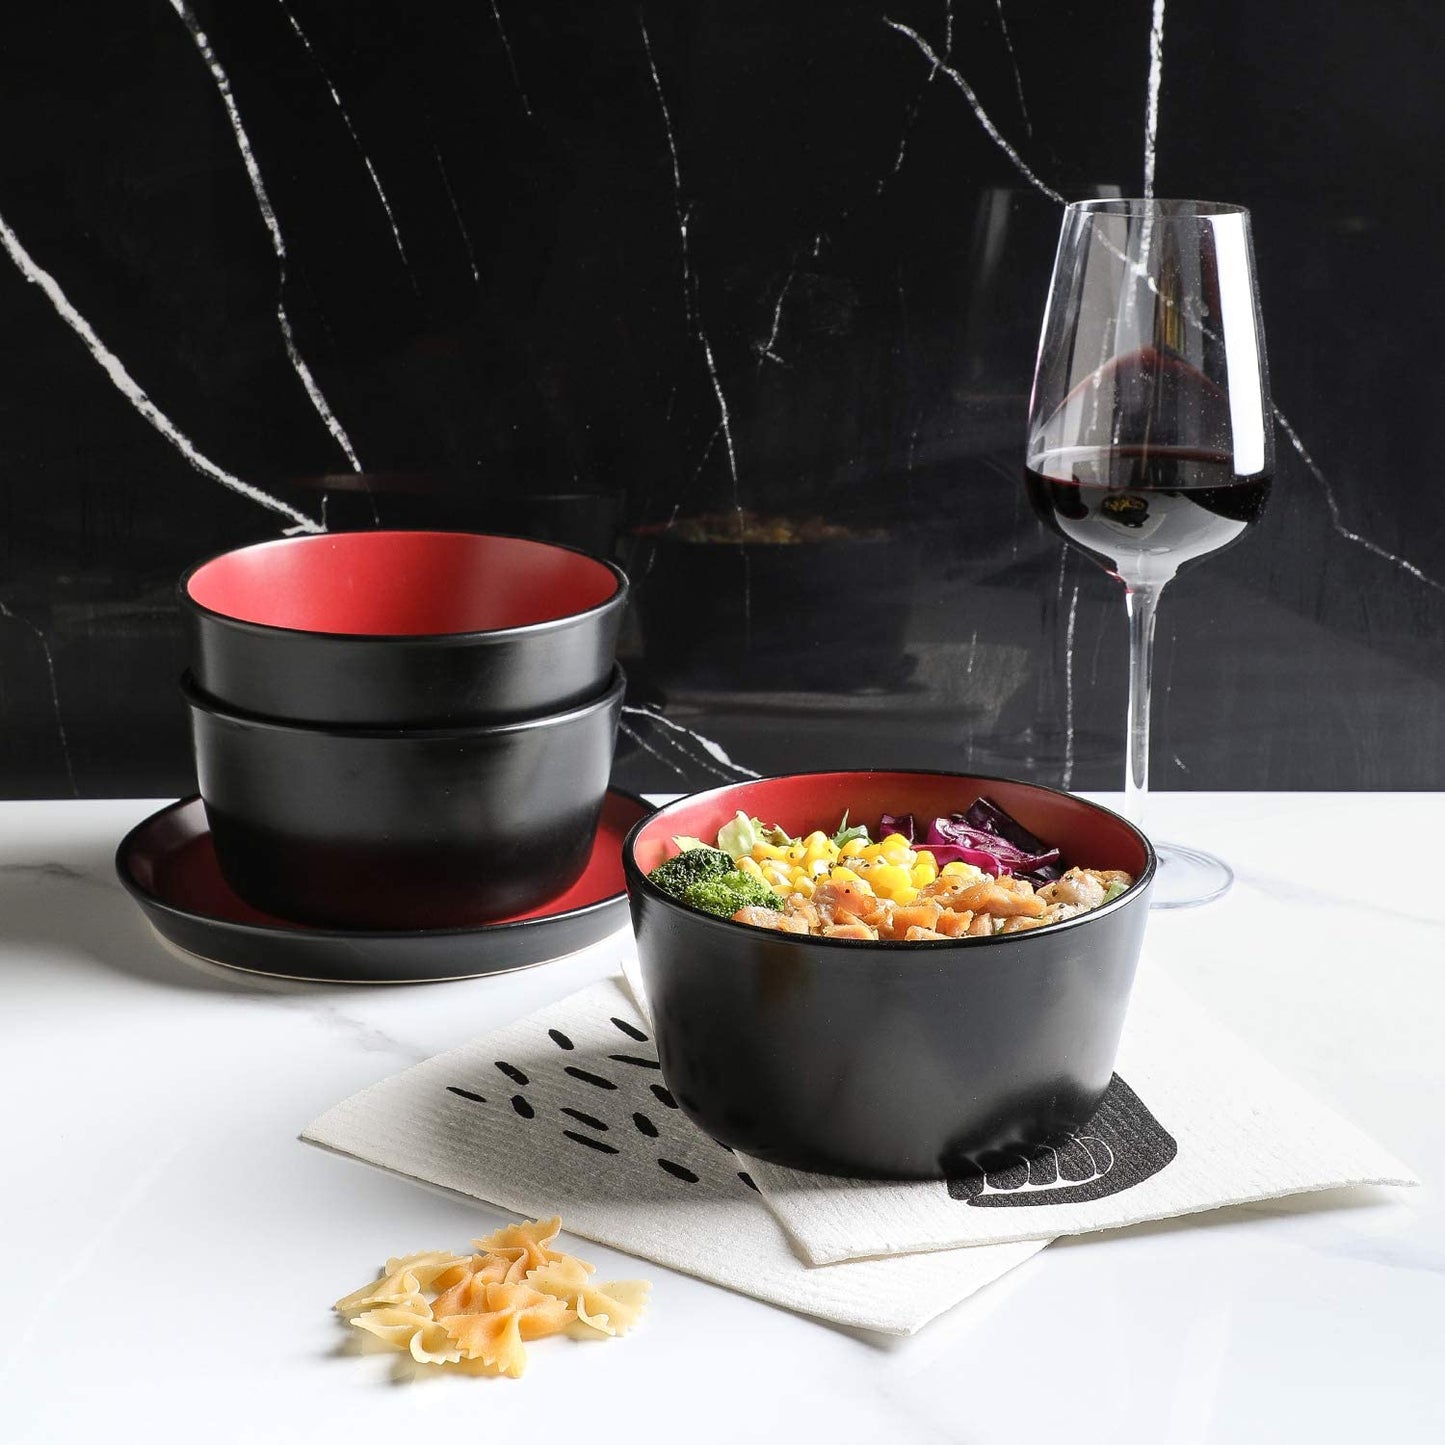 Stone Lain 16 Pieces Two-Tone Color Glaze without Rim Stoneware Round Dinnerware Set, Red and Black